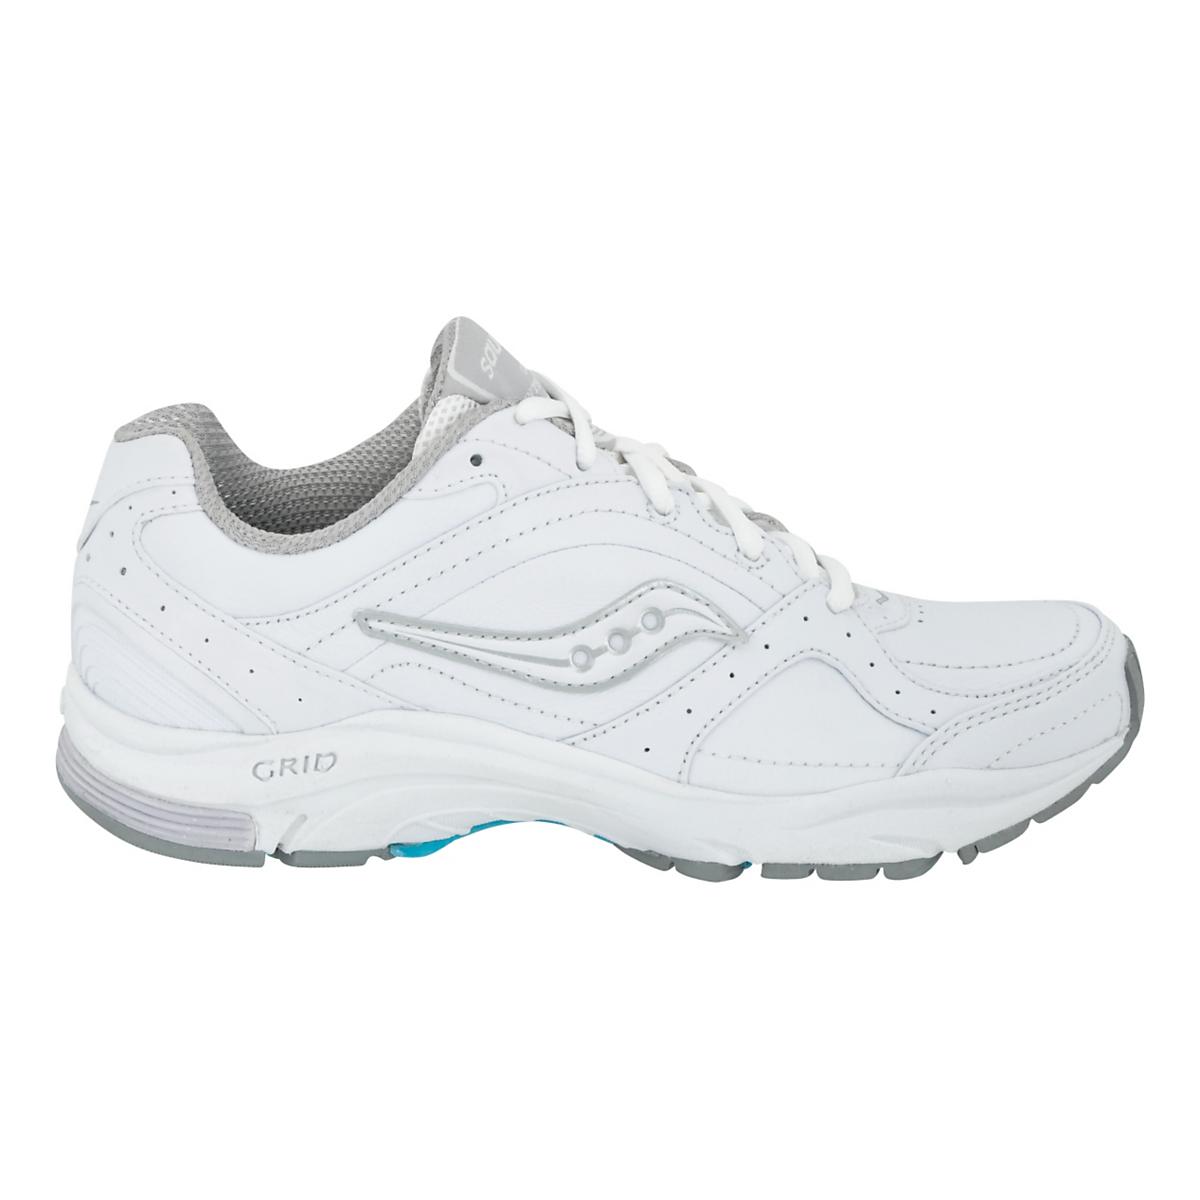 Womens Saucony Grid Integrity ST2 Walking Shoe at Road Runner Sports